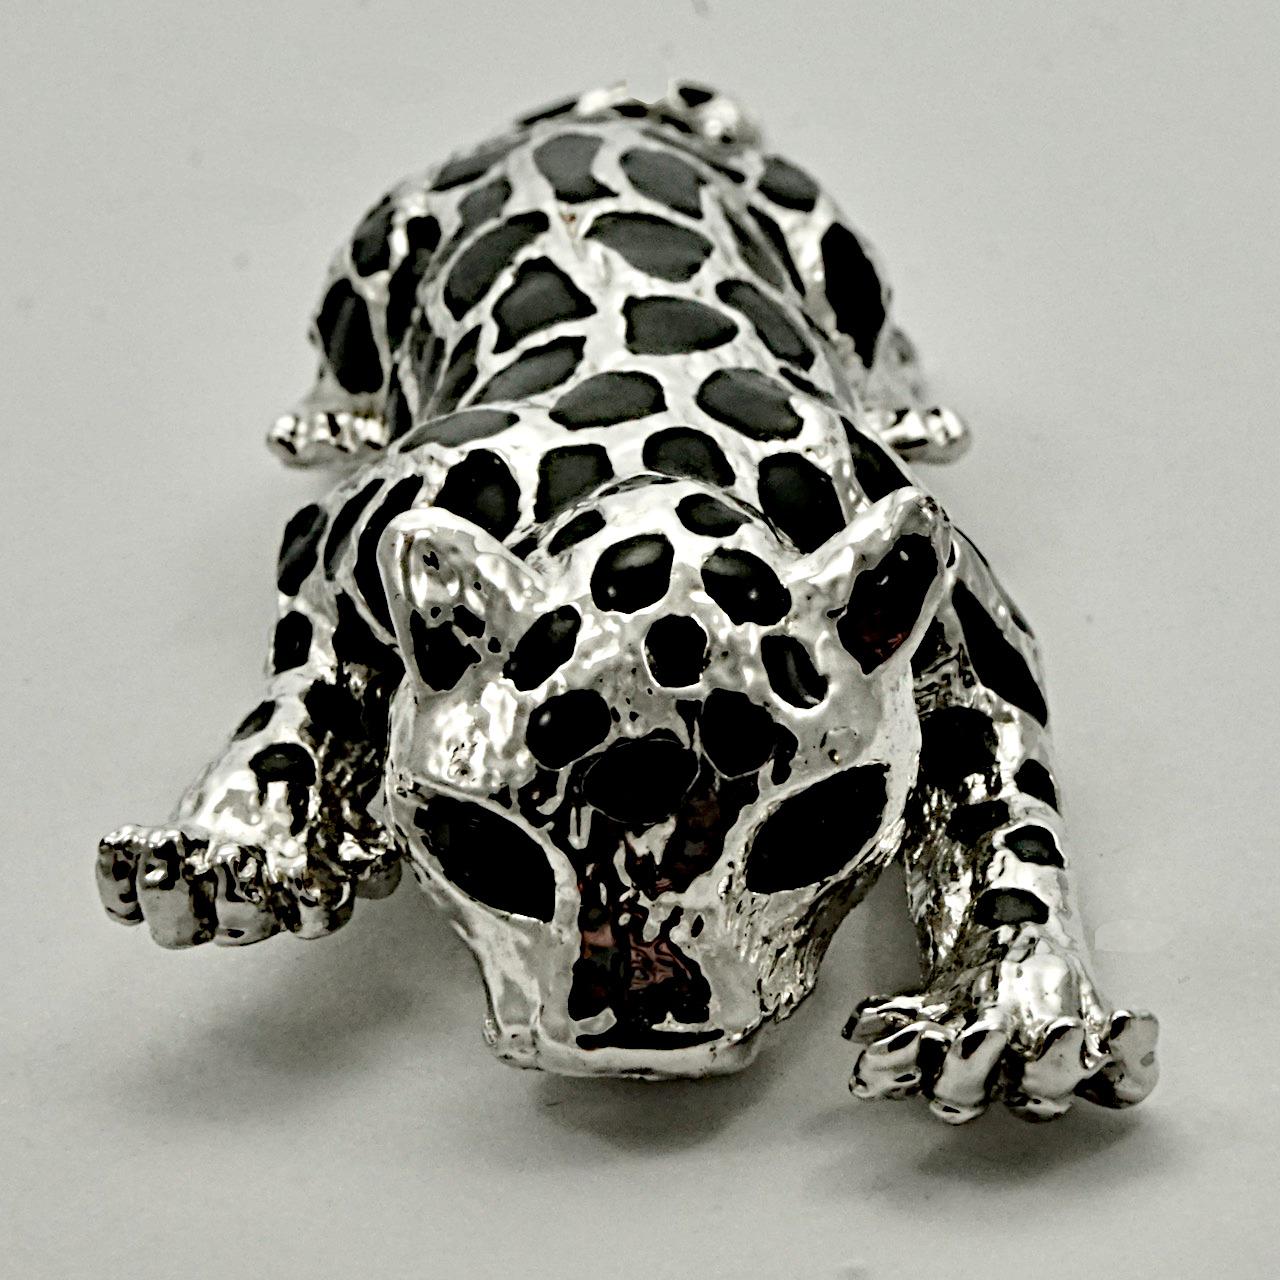 Silver Plated Black Enamel Cat Leopard Brooch with Black Rhinestone Eyes In Good Condition For Sale In London, GB